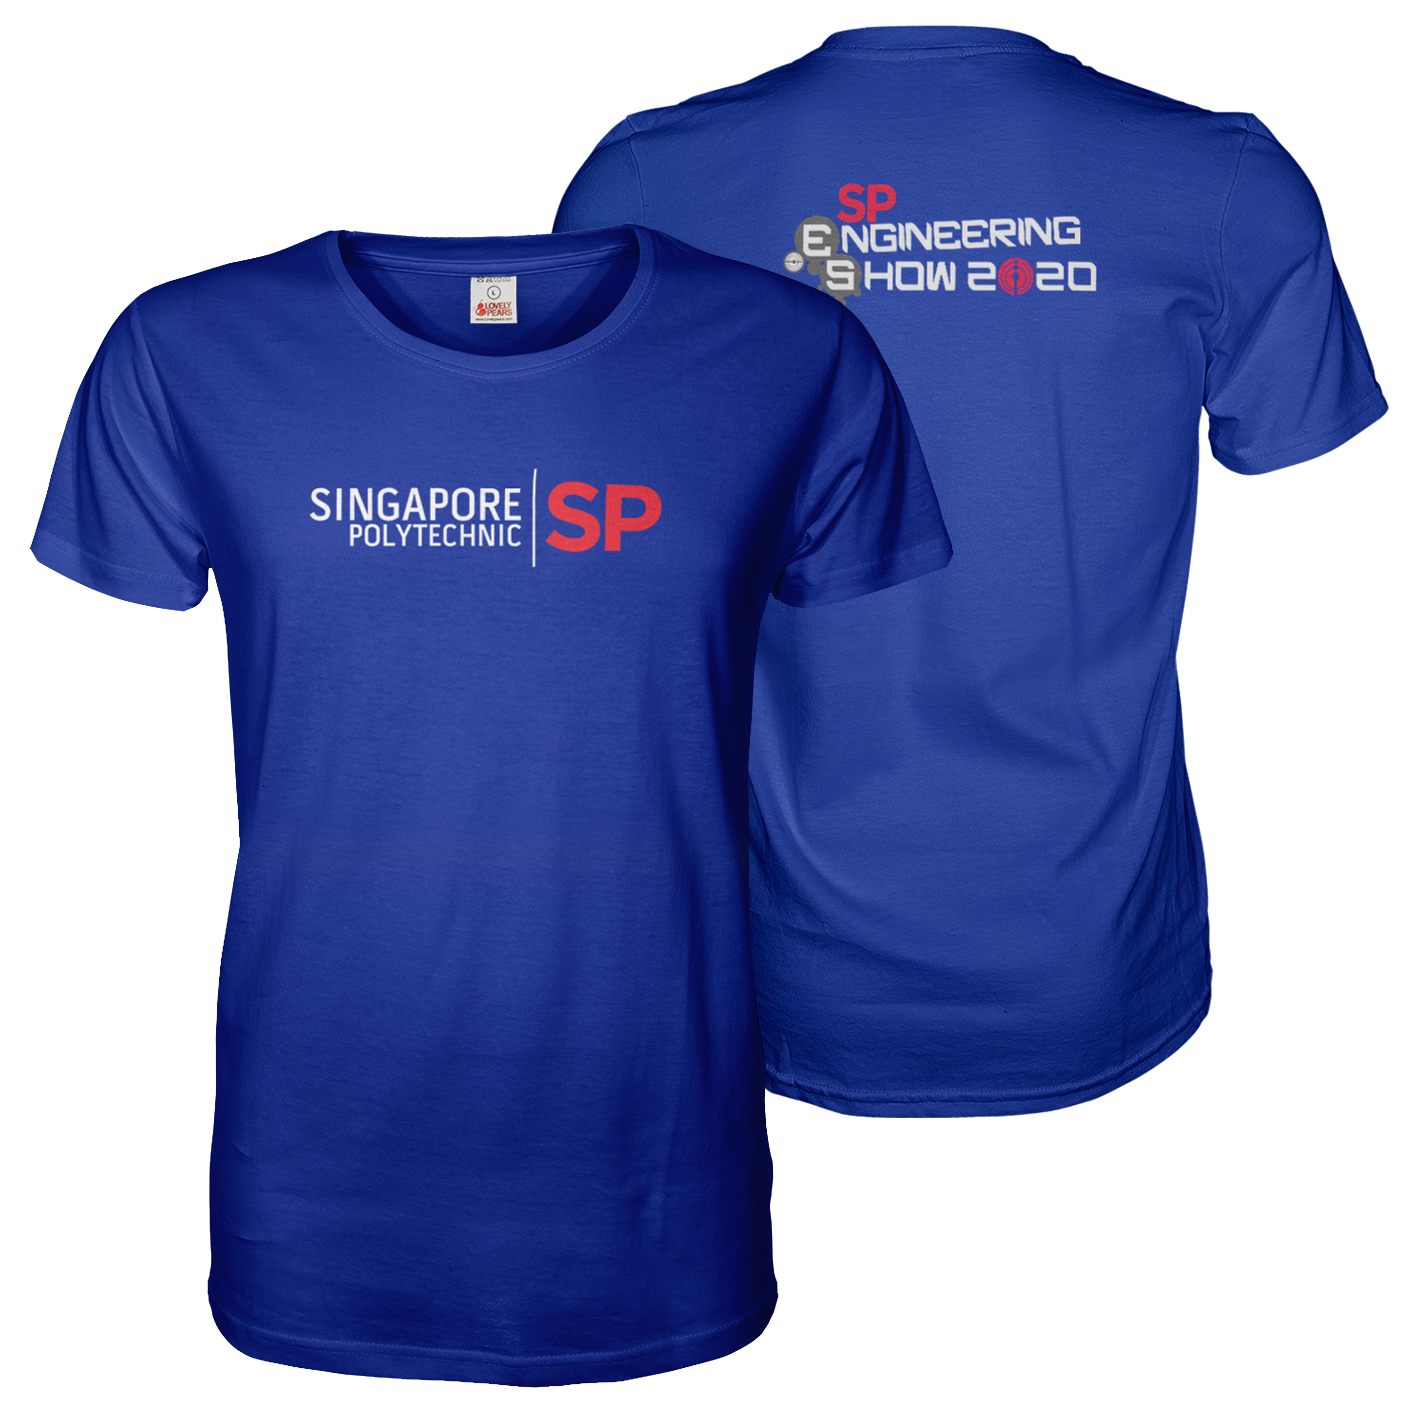 Royal Blue tee shirt with A4 Singapore Polytechnic Engineering Show front and back